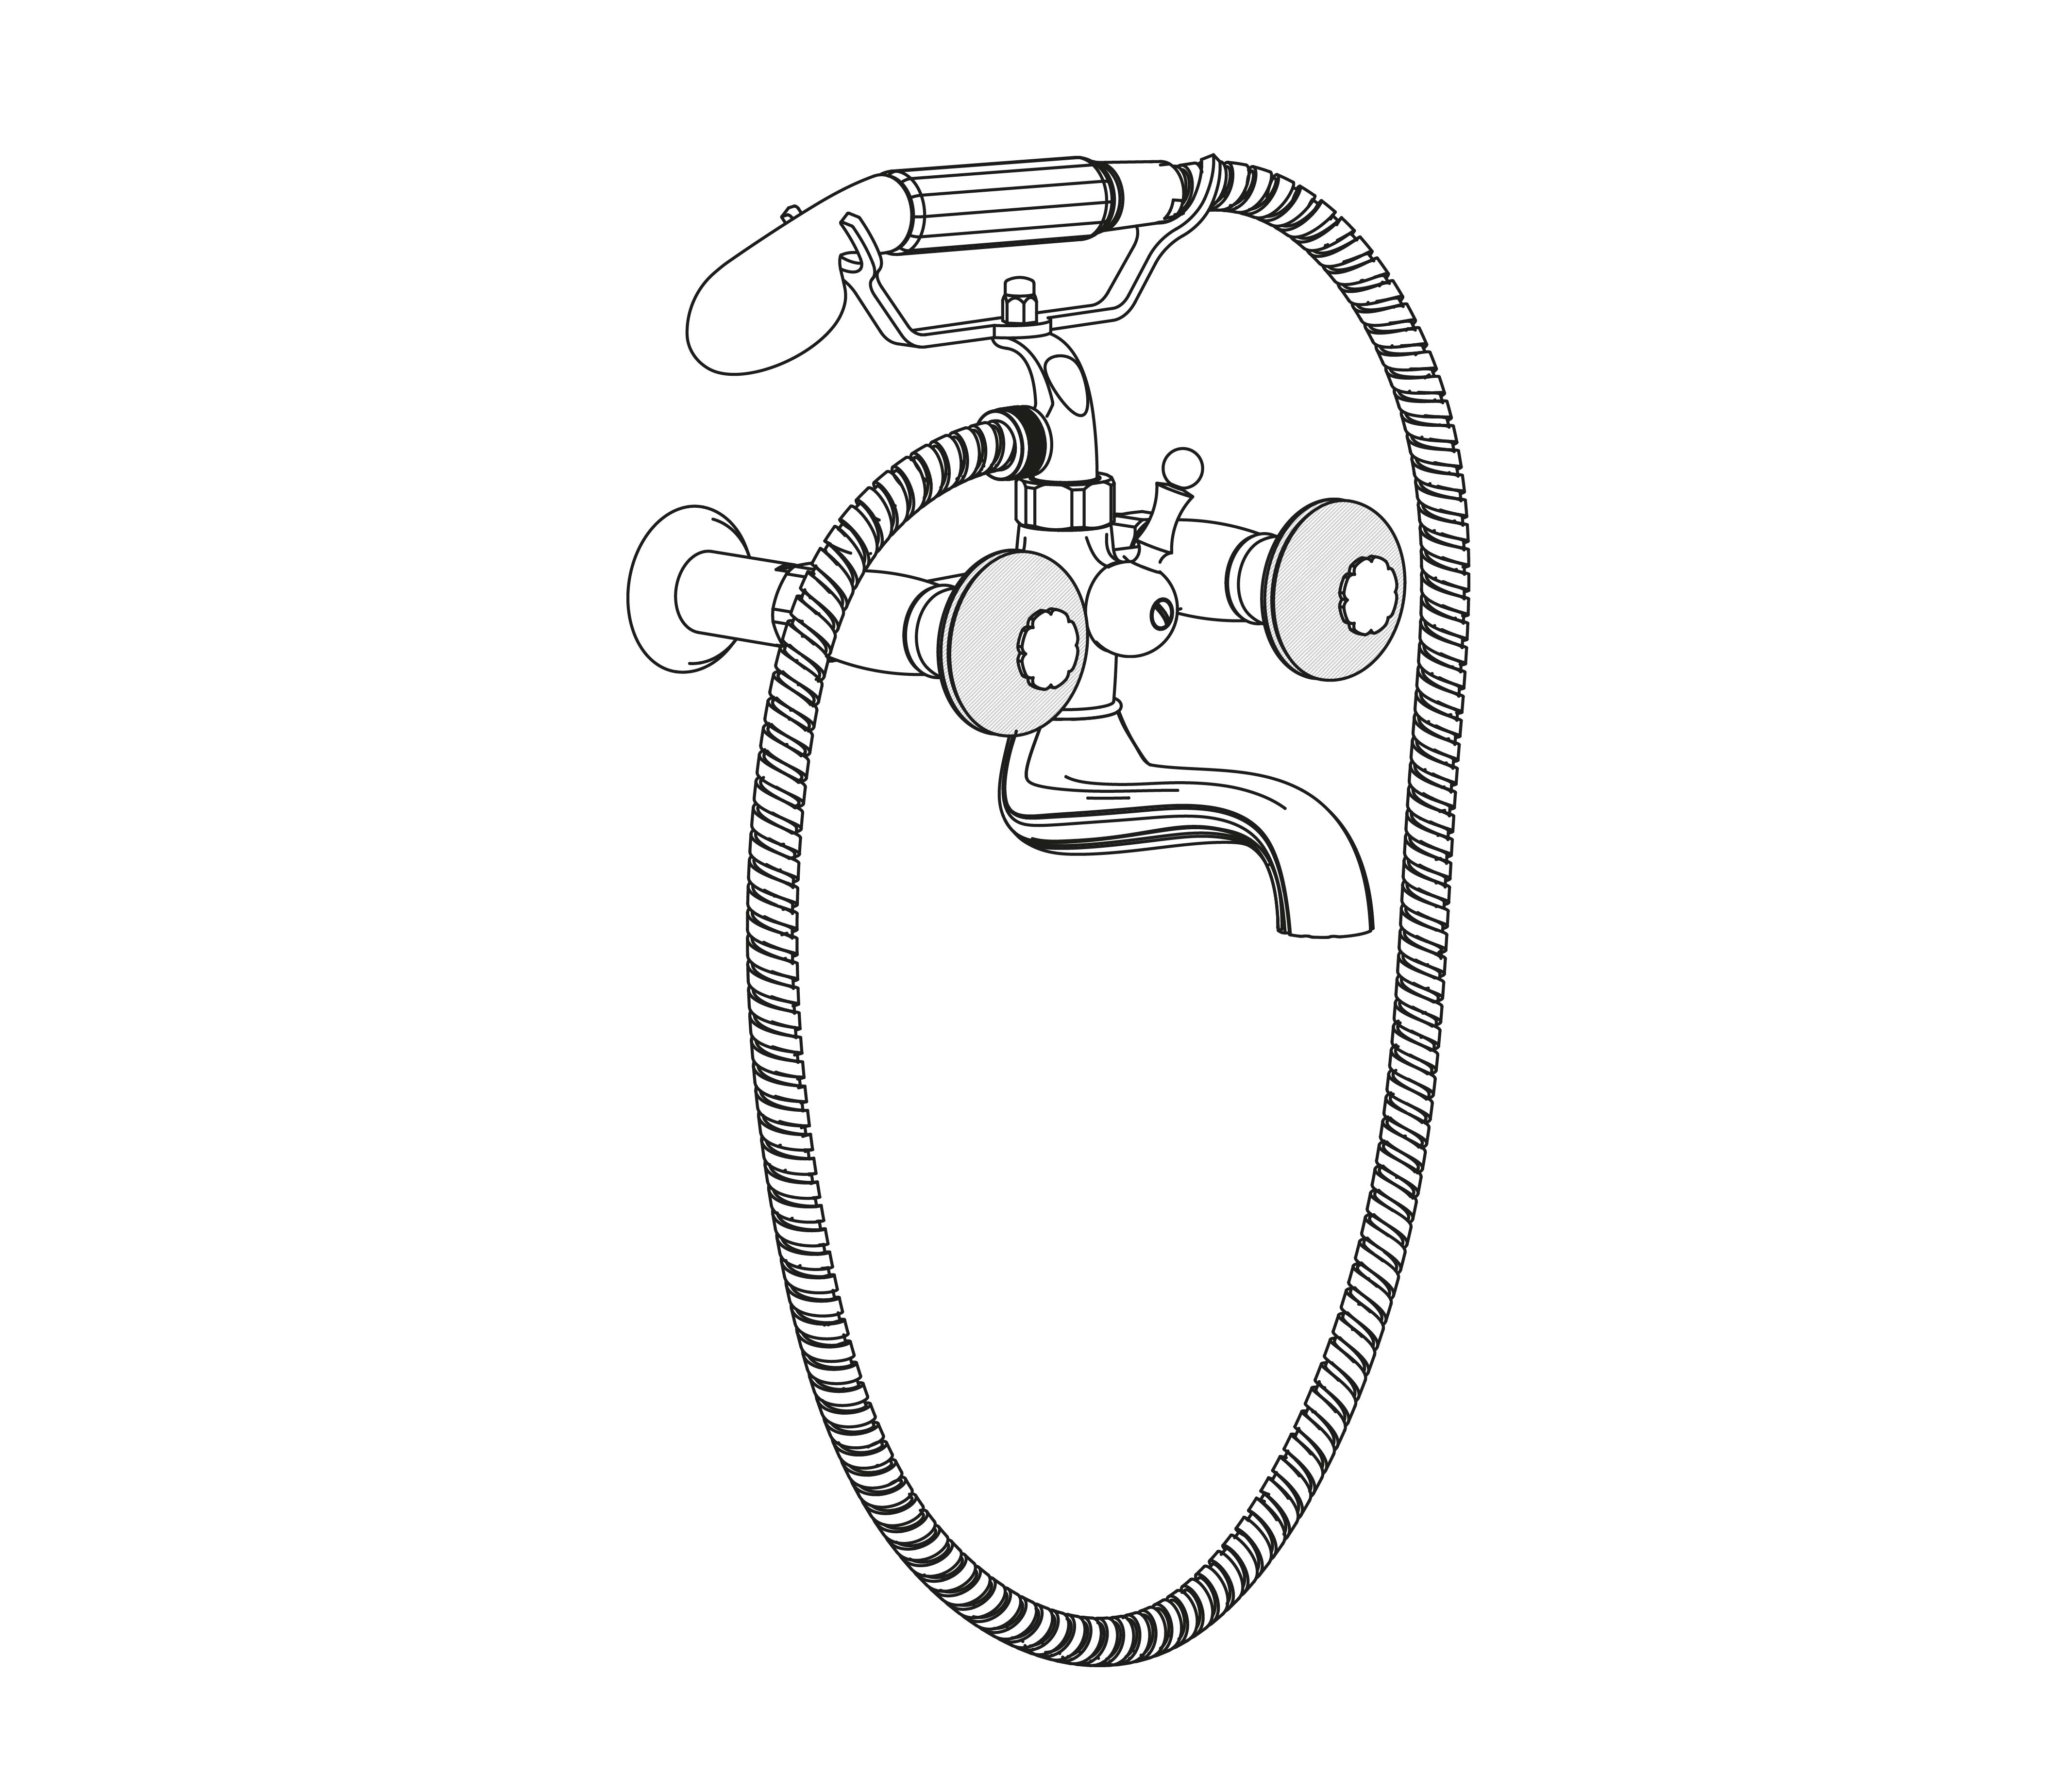 C50-3201 Wall mounted bath and shower mixer